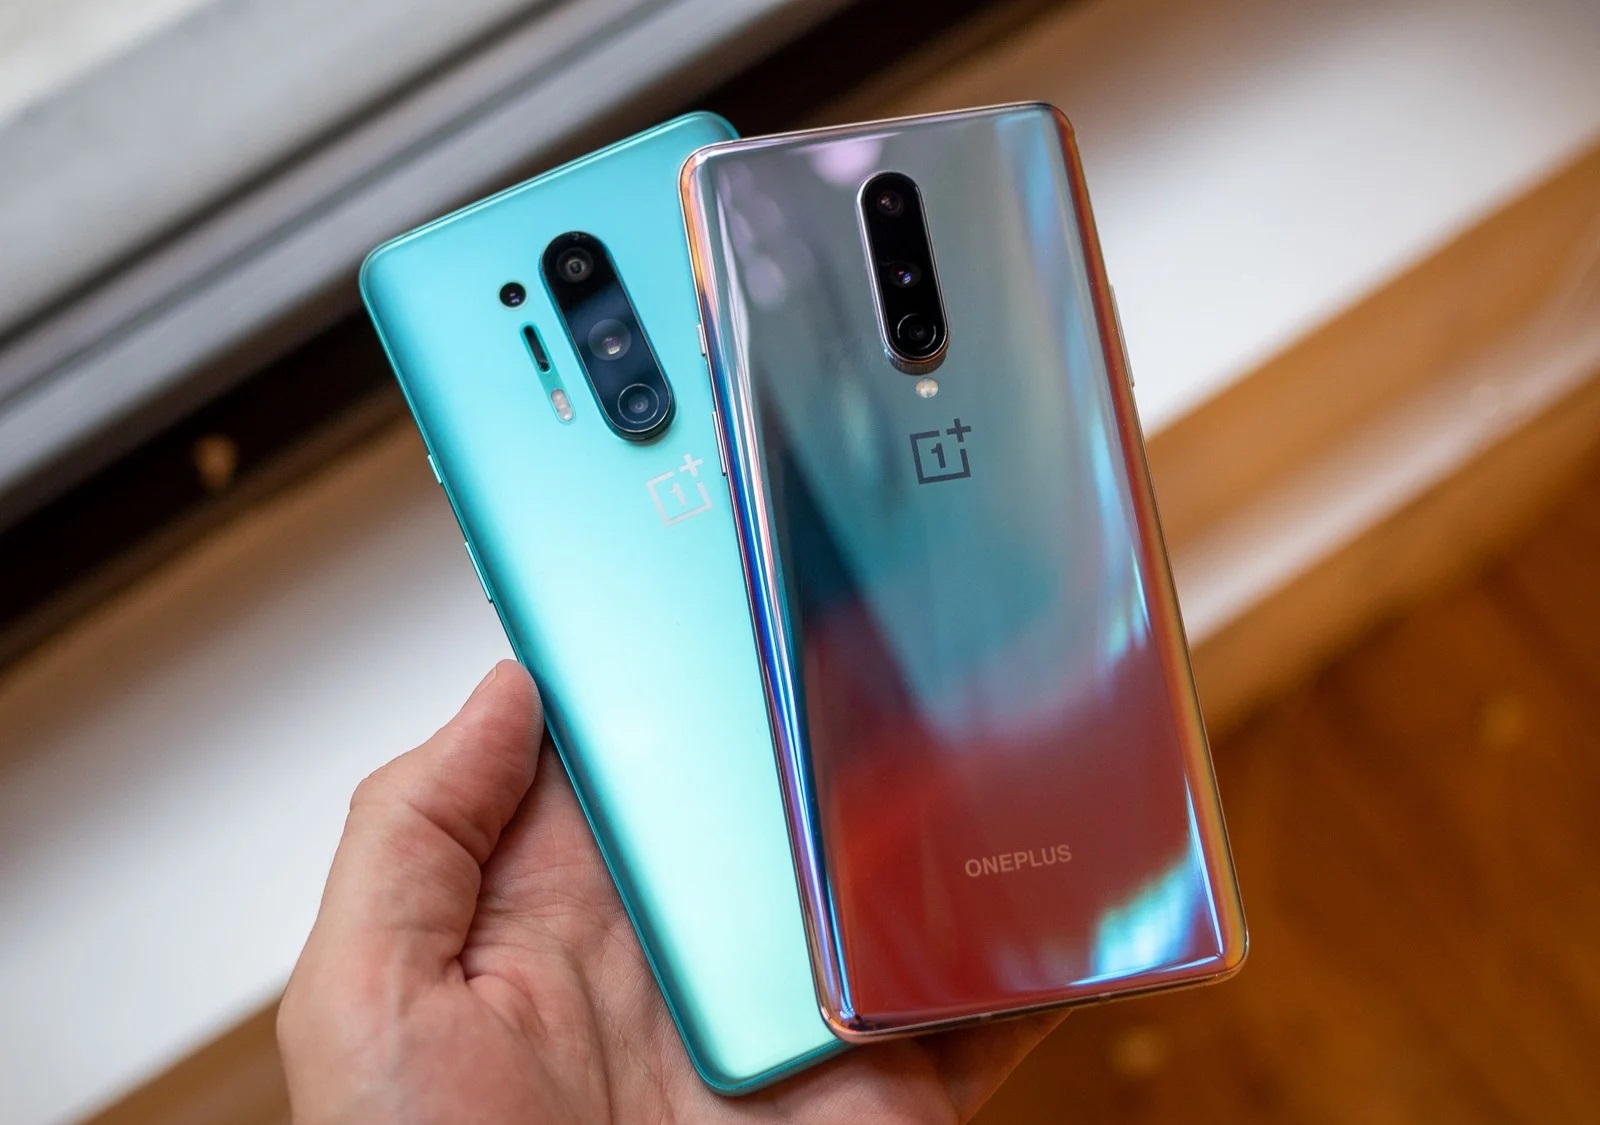 Oneplus 8 Pro Does Not Really Have X Ray Vision Knine Vox